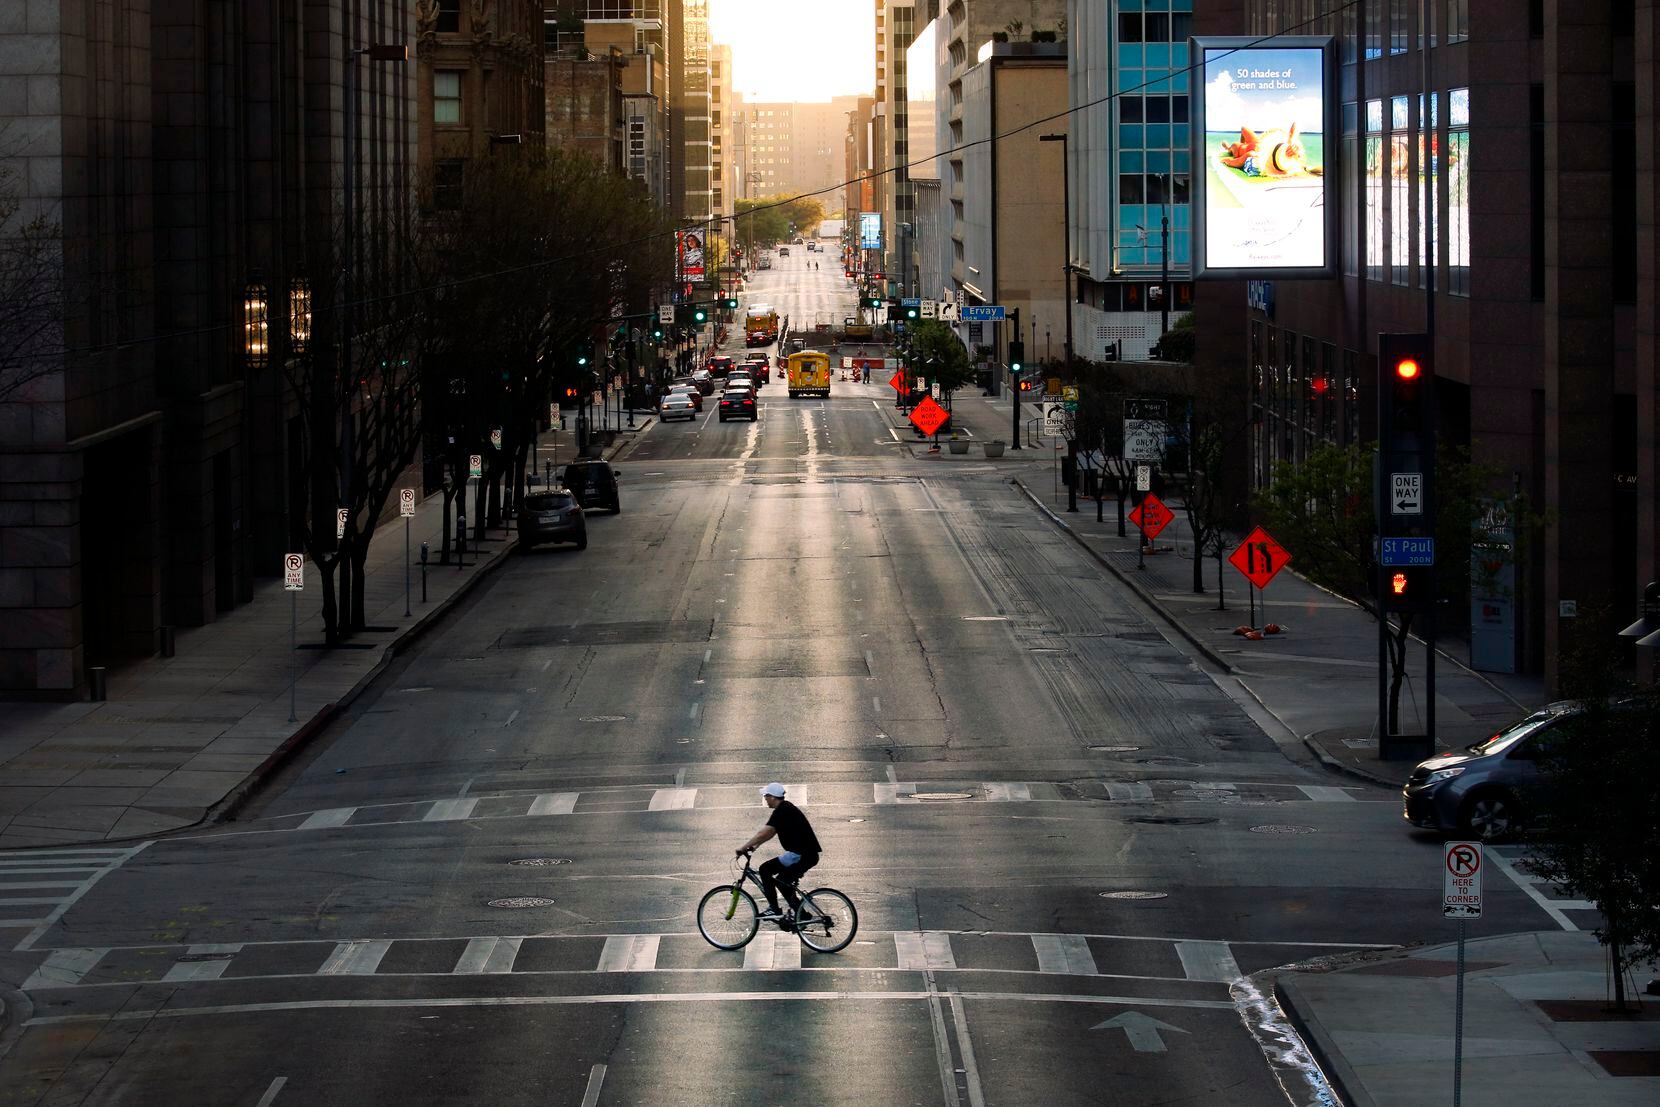 With very few cars on the street, a cyclist peddles across Elm St. in downtown Dallas, Wednesday evening, March 25, 2020.  There's less traffic than normal after Judge Clay Jenkins ordered a shelter-in-place due to coronavirus.  (Tom Fox/The Dallas Morning News)